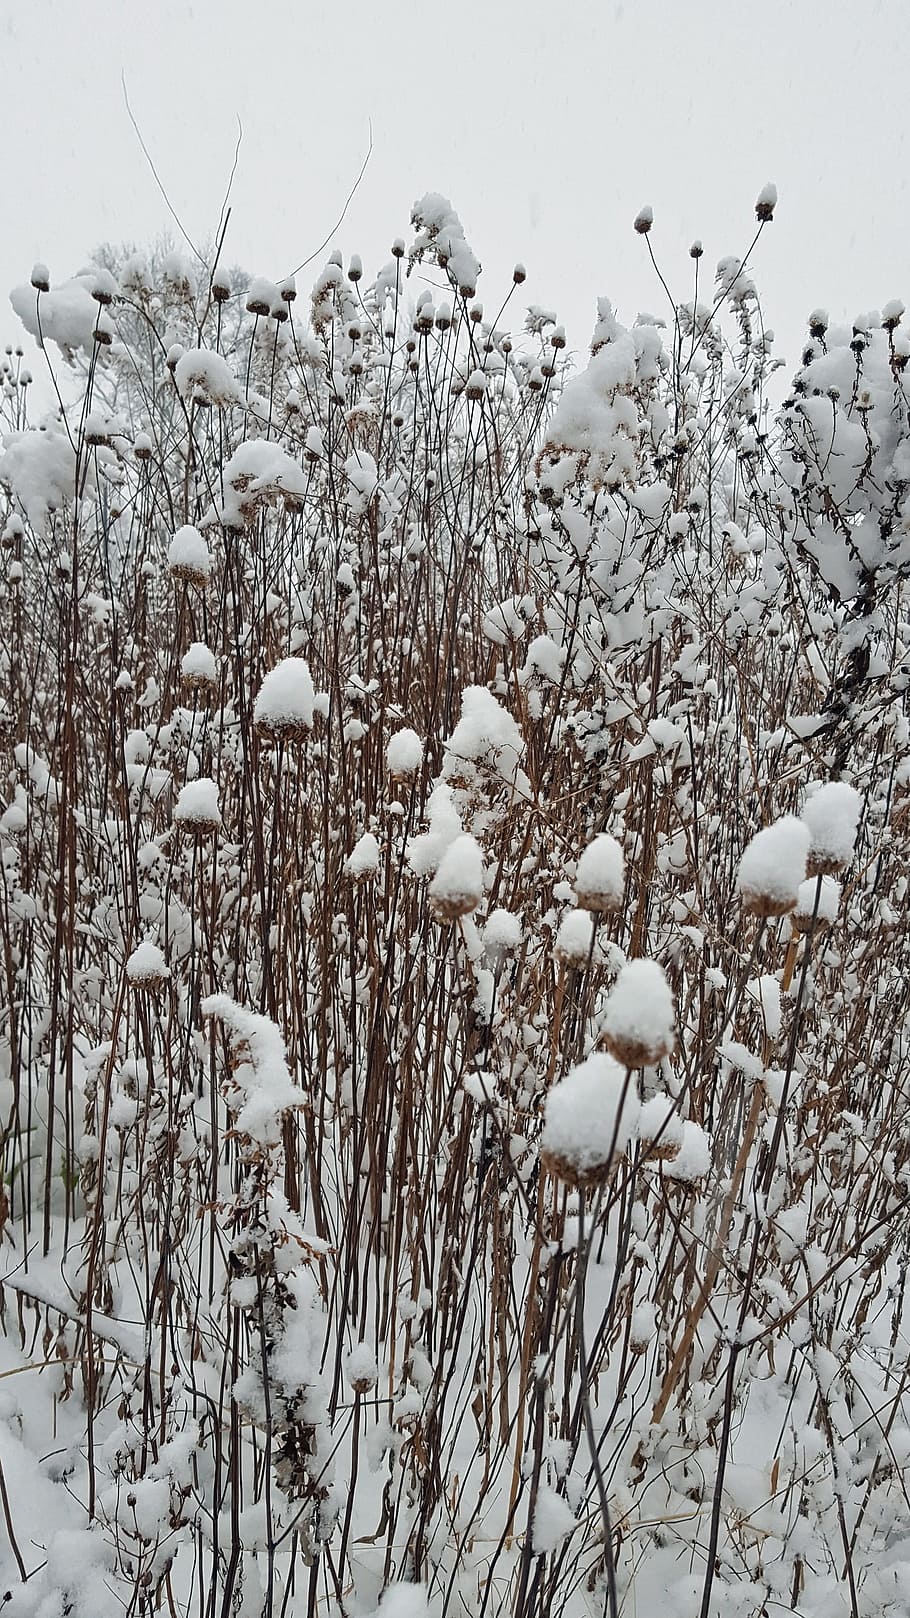 Fresh snow in winter covers a field of spent cosmos., snowfall